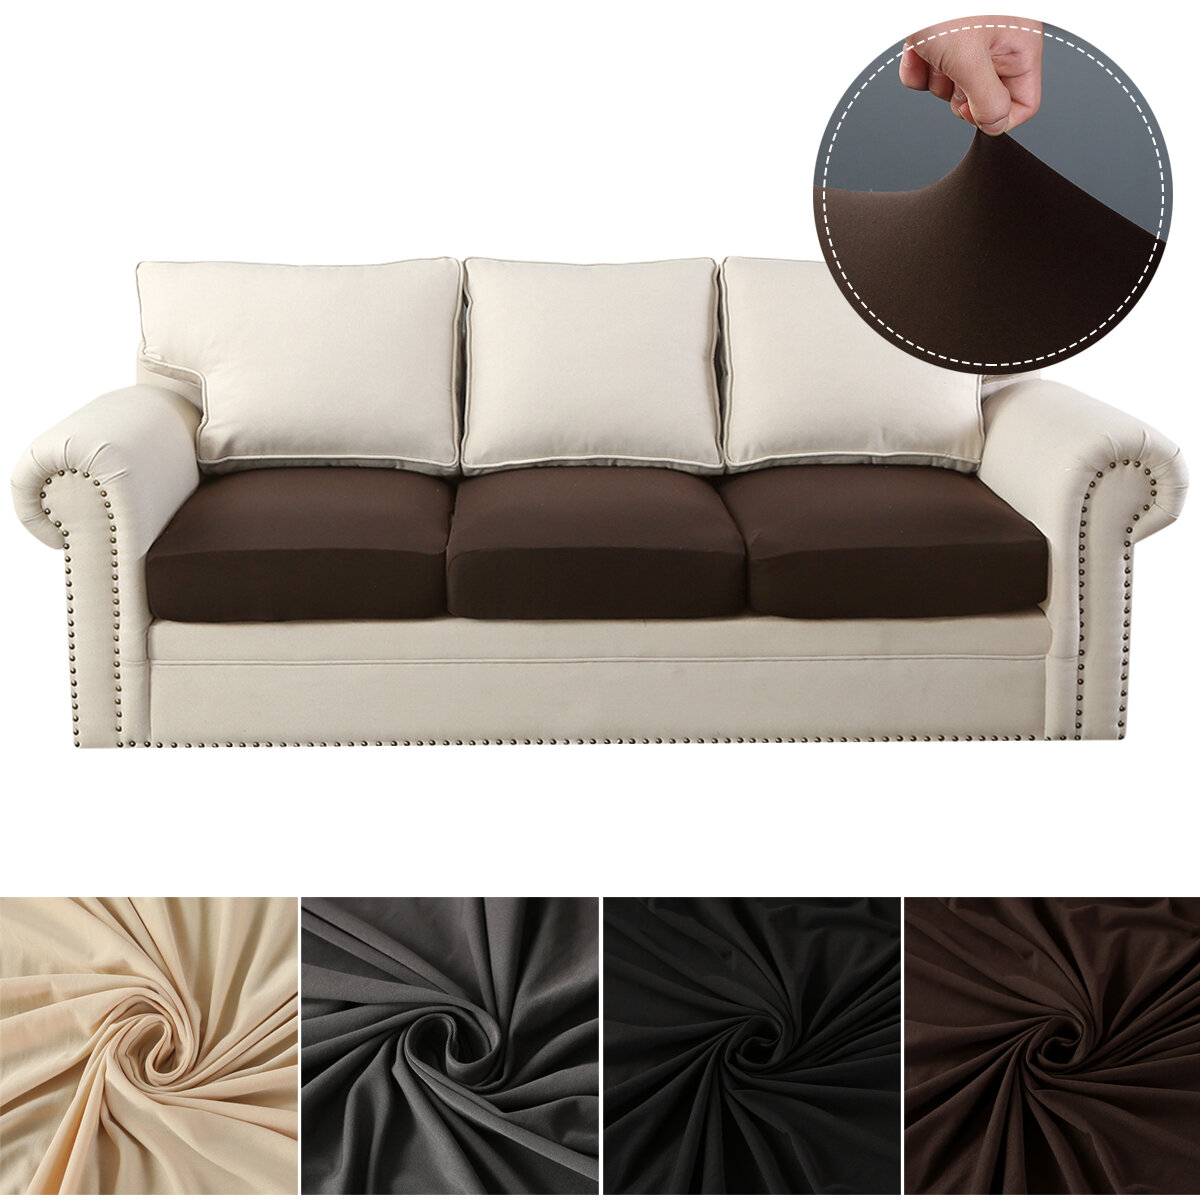 1/2 Seaters Sofa Cushion Cover Stretch Sofa Chair Seat Protector Elastic Washable Removable Slipcover Home Office Furnit